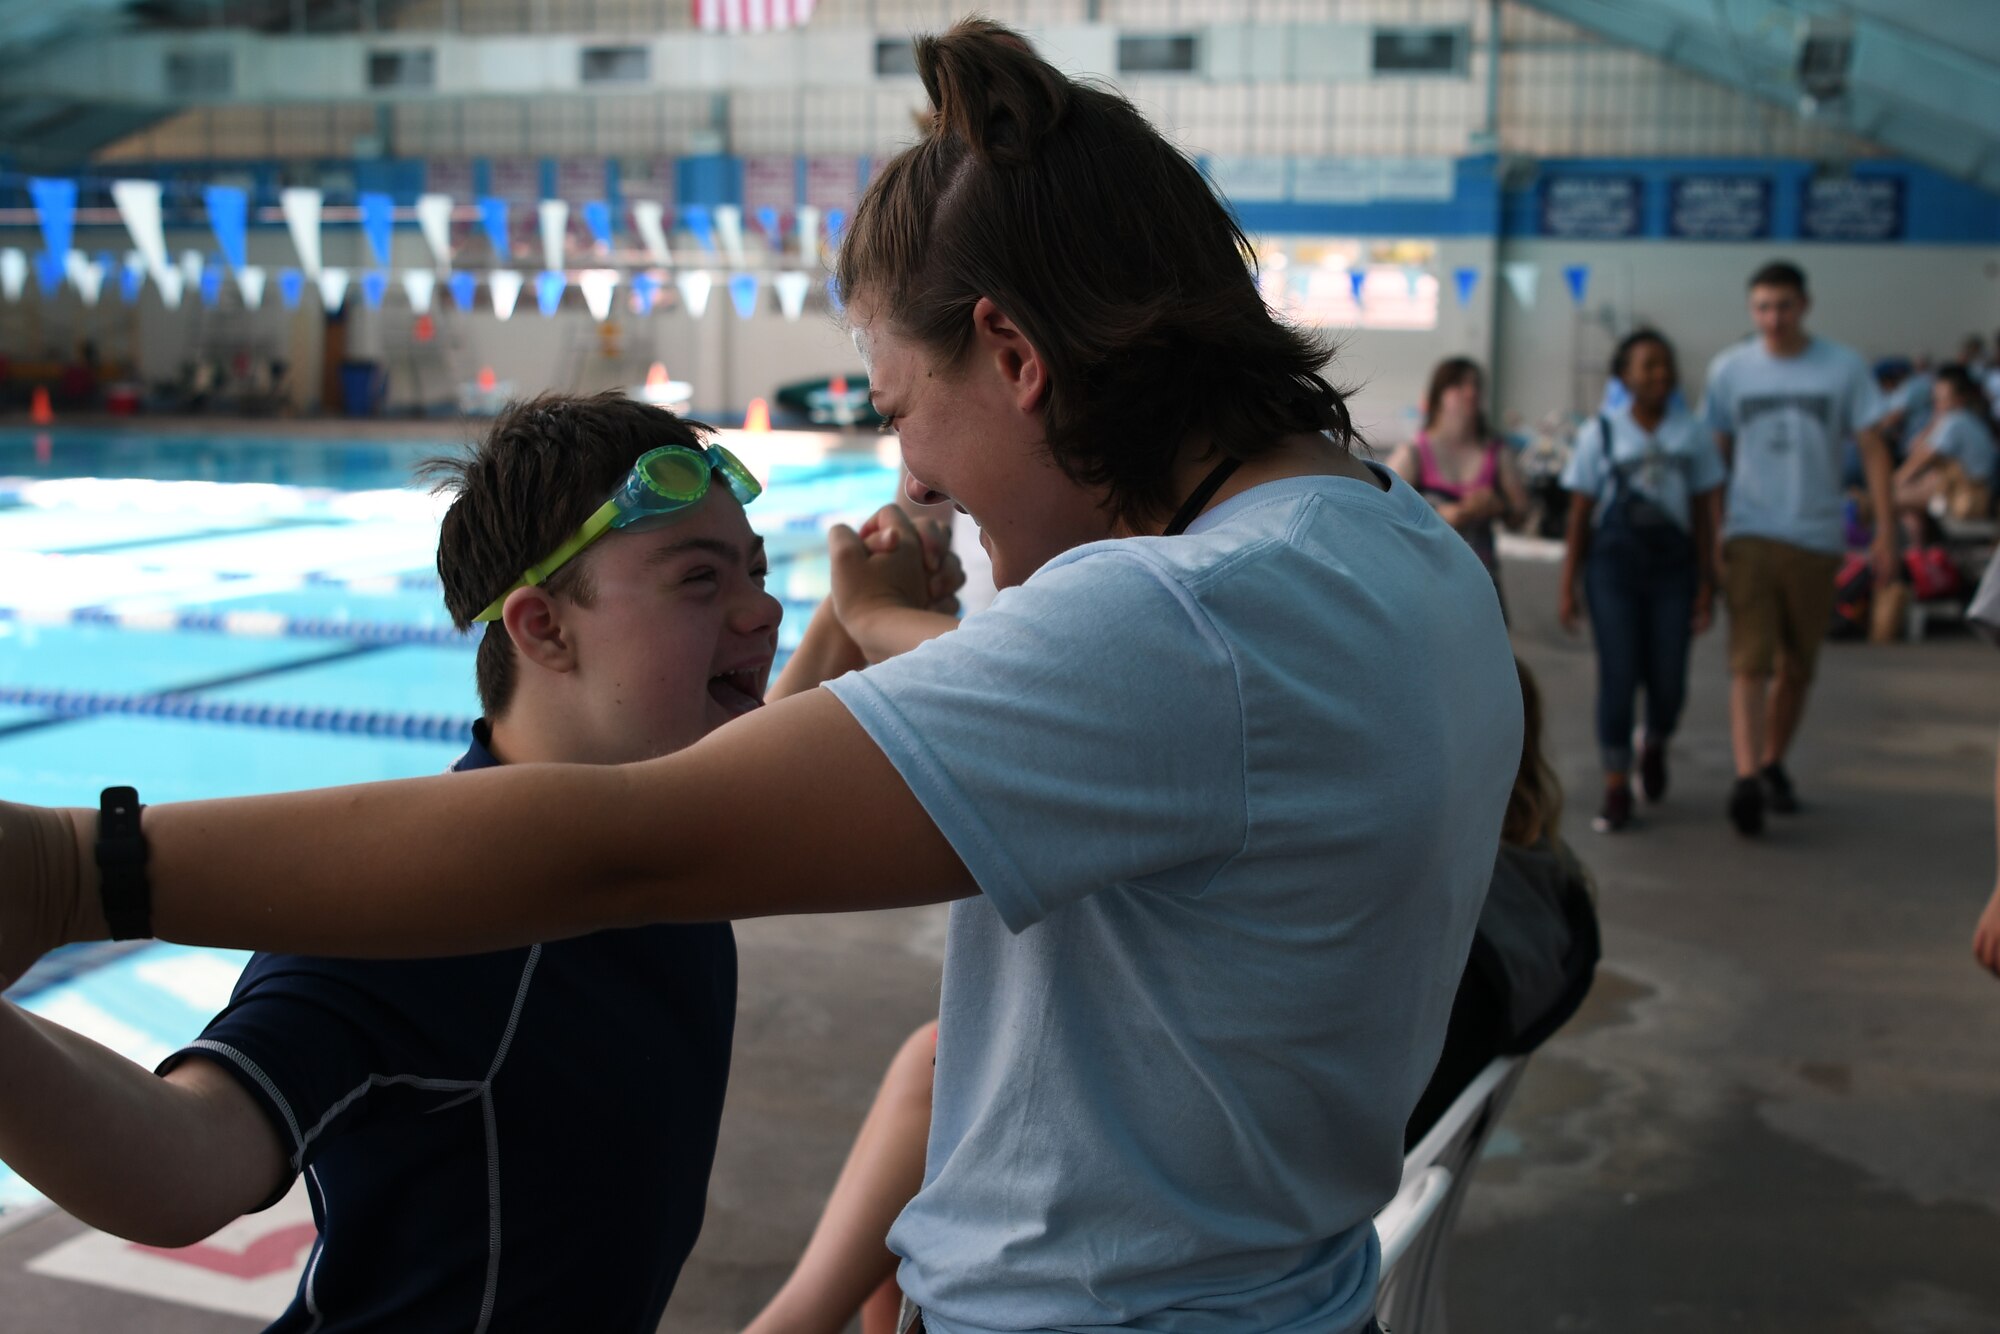 Easton Slutz, District 5 Special Olympics Mississippi athlete, celebrates with U.S. Air Force Airman Kaimryn Hursch, 336th Training Squadron student, during SOMS at the City of Biloxi Natatorium, May 12, 2018. Throughout the SOMS weekend, Slutz’s Airman Sponsors spent time and cheered him on while he competed in the 4x100 freestyle relay, 50 meter backstroke and 50 meter freestyle. (U.S. Air Force photo by Airman 1st Class Suzie Plotnikov)